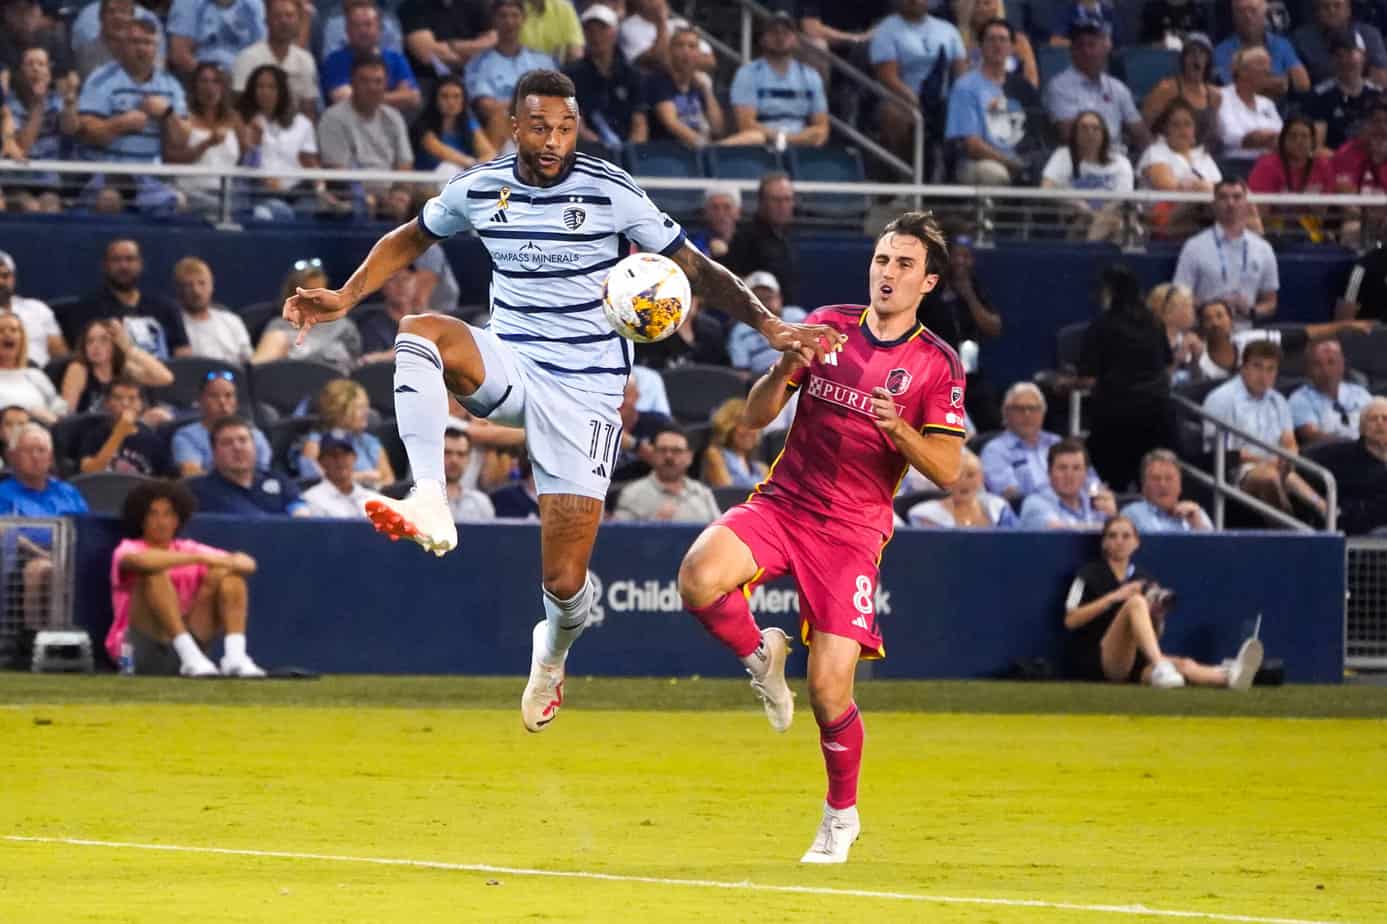 St. Louis City vs. Sporting KC Preview and Free Pick